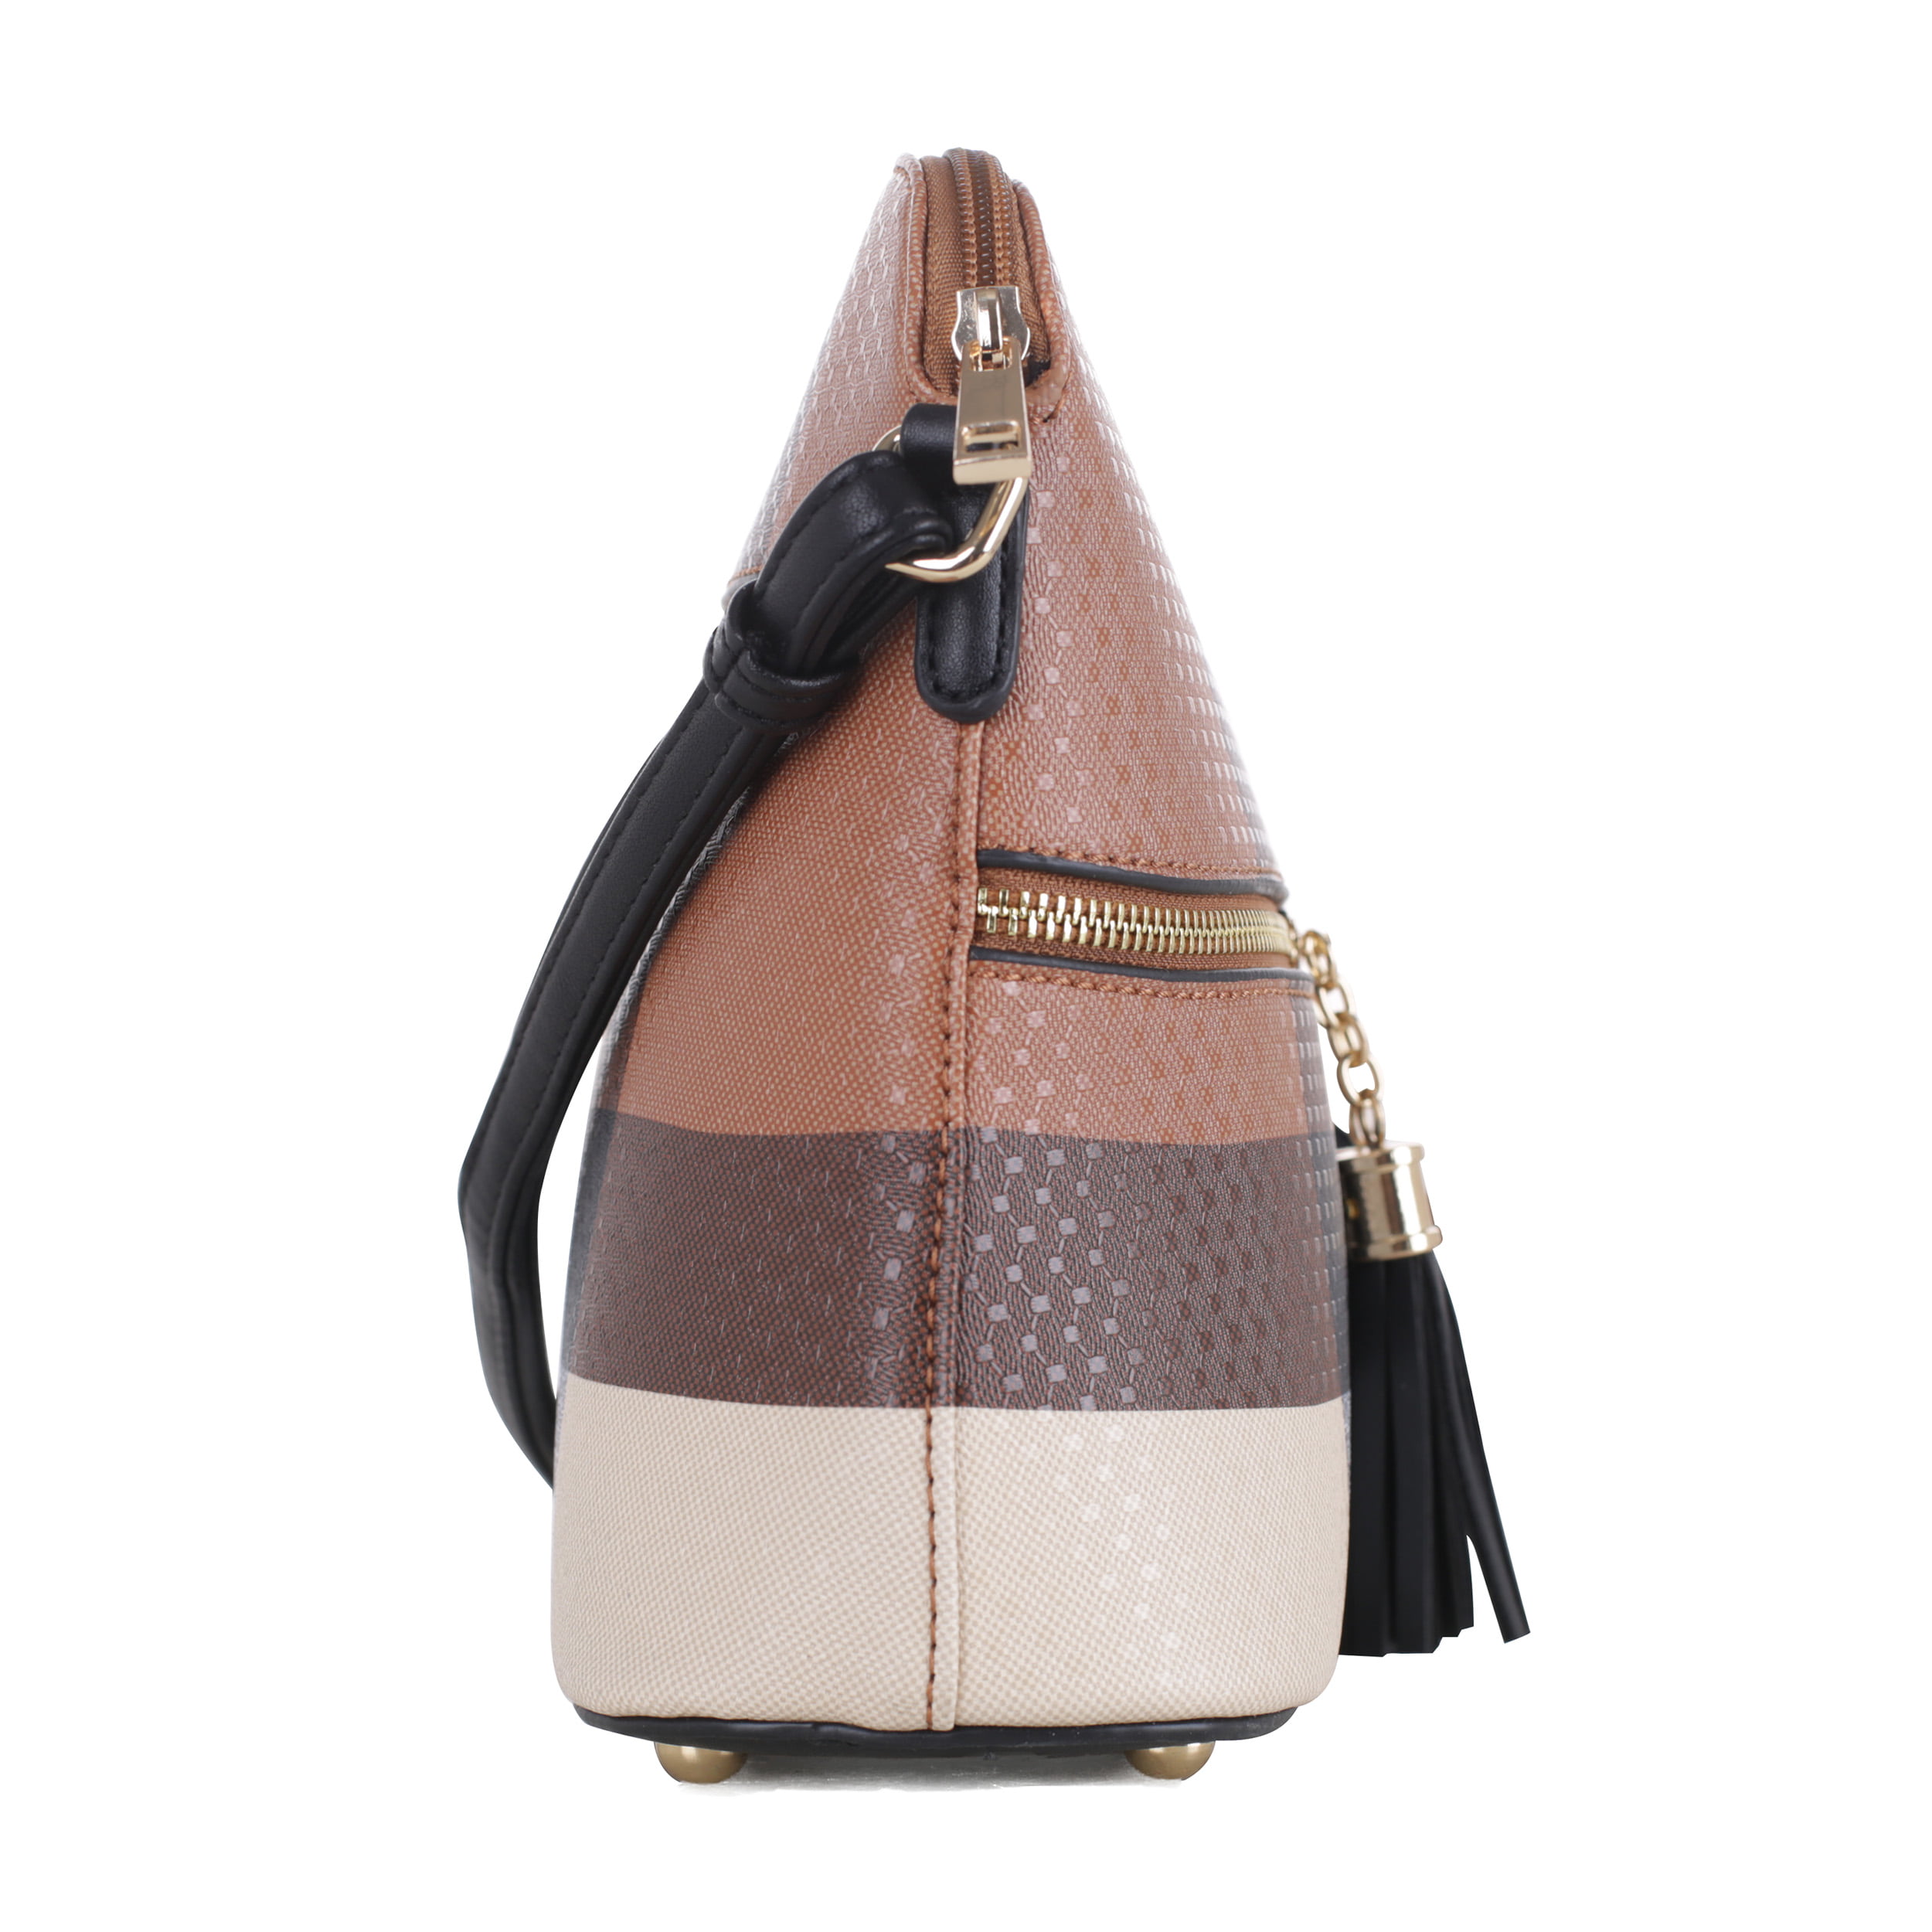 Lady Luxe Dome Satchel